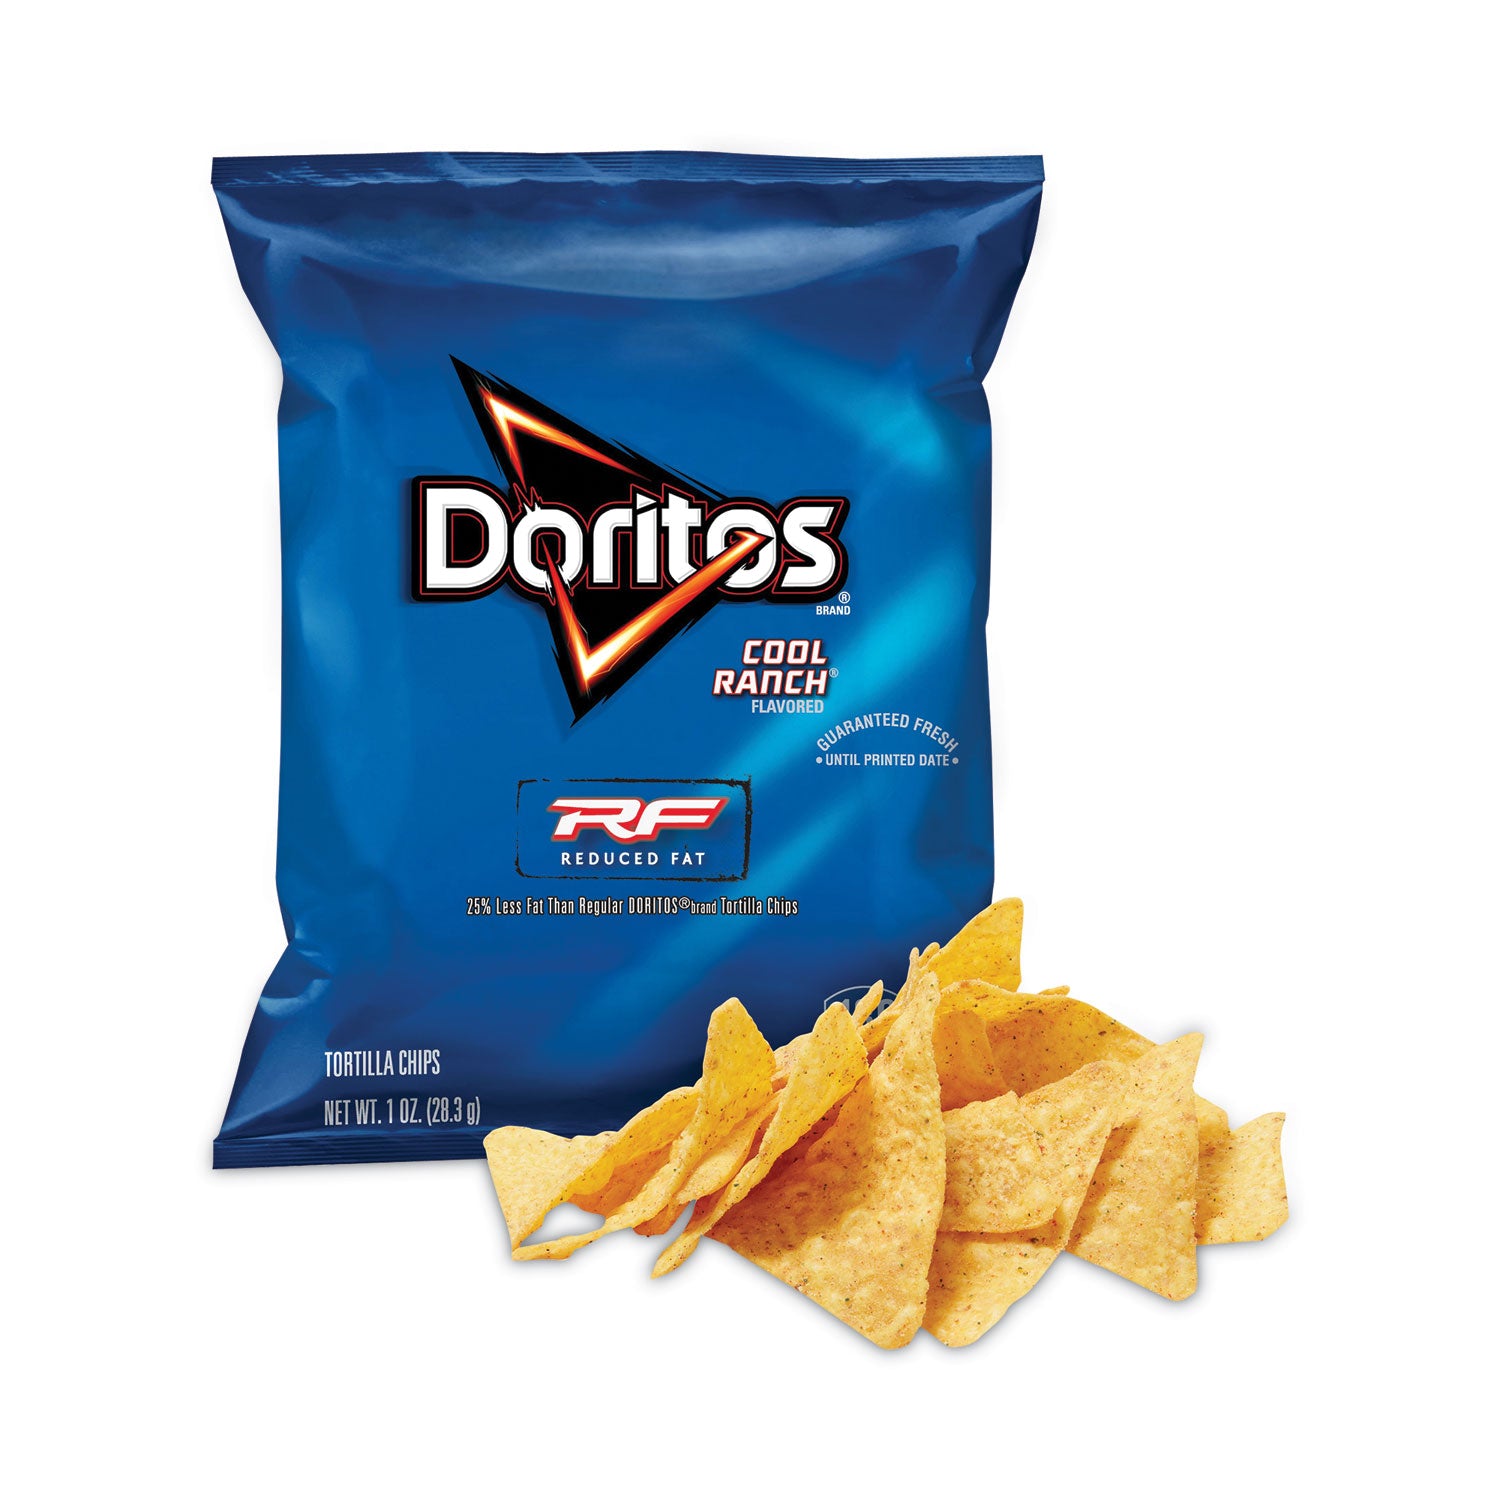 reduced-fat-cool-ranch-tortilla-chips-1-oz-bag-72-bags-carton-ships-in-1-3-business-days_grr29500056 - 2